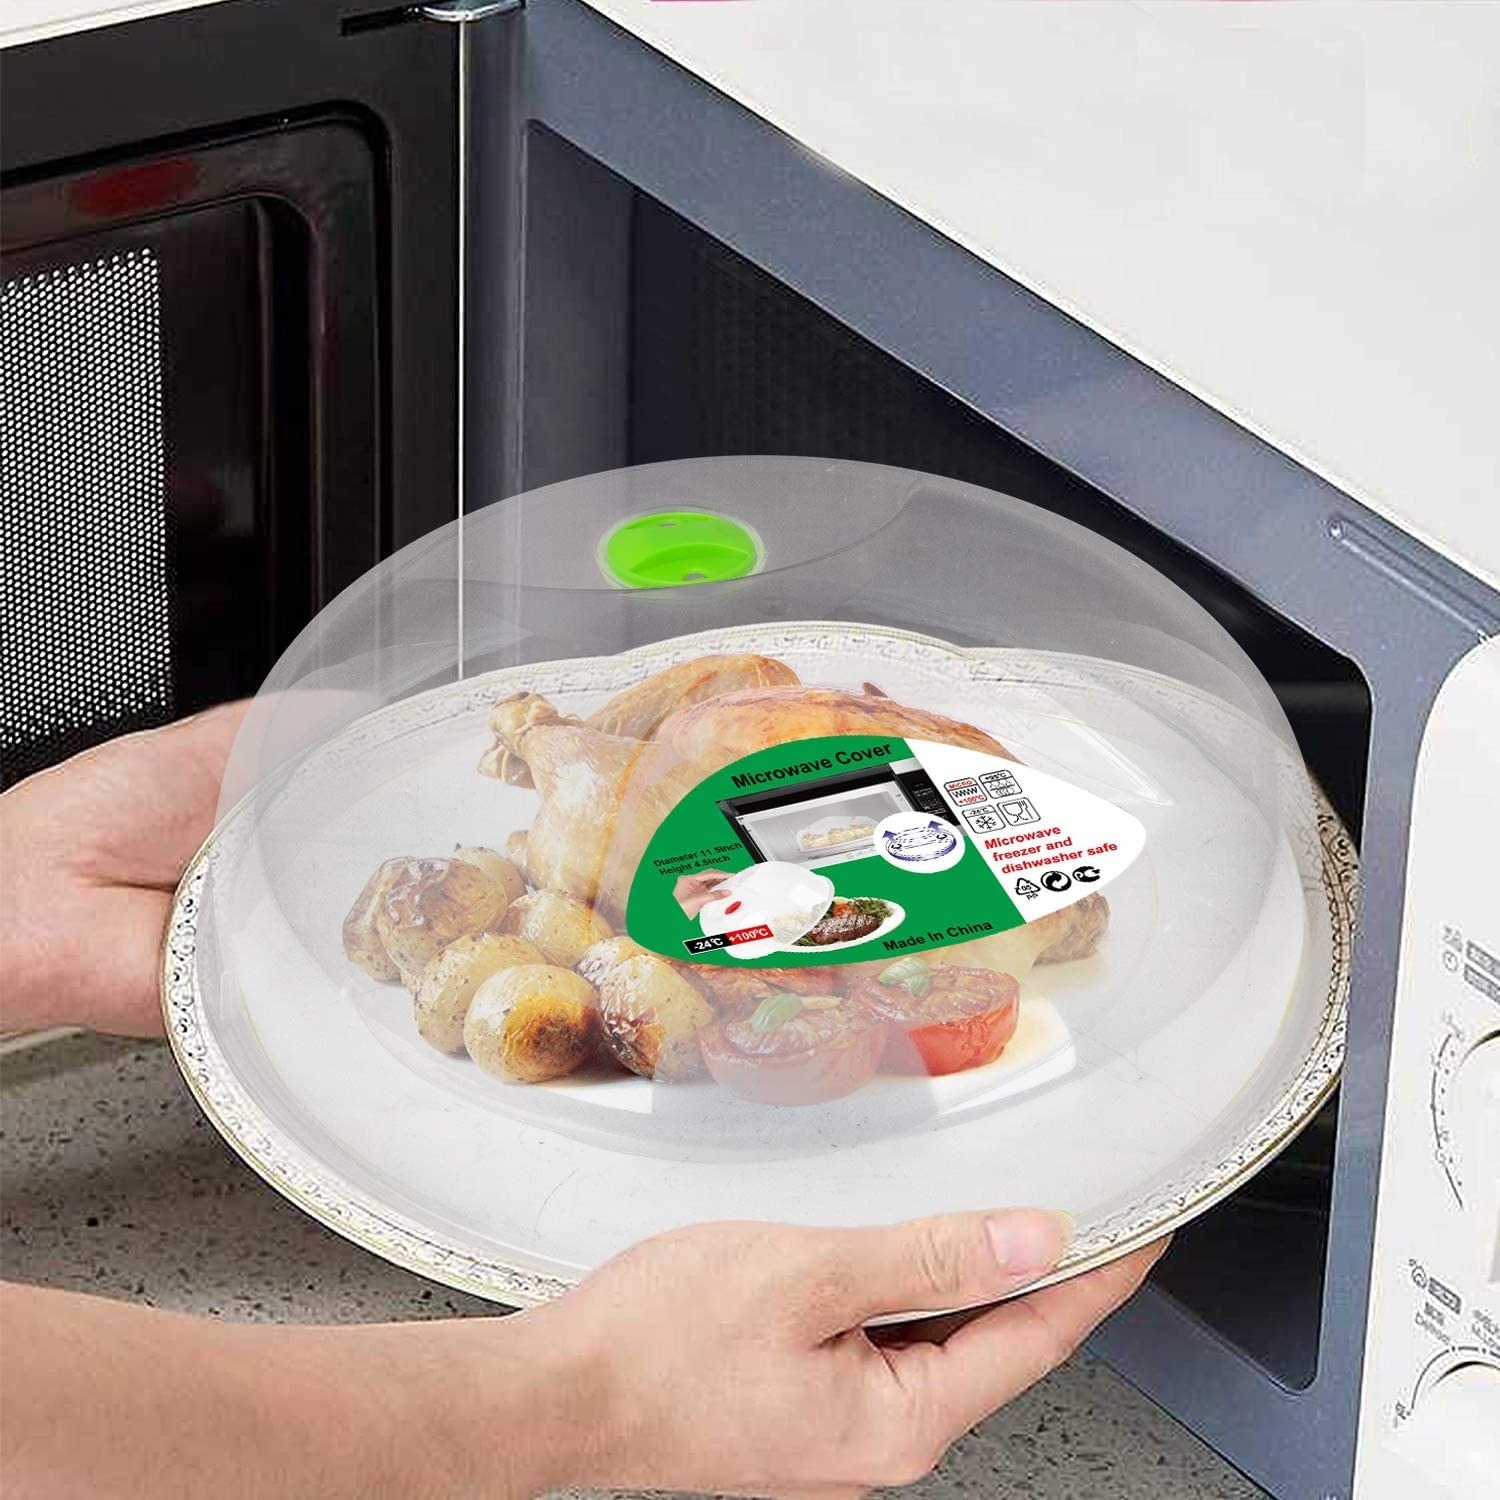 A person putting a meal with the cover on it into the microwave